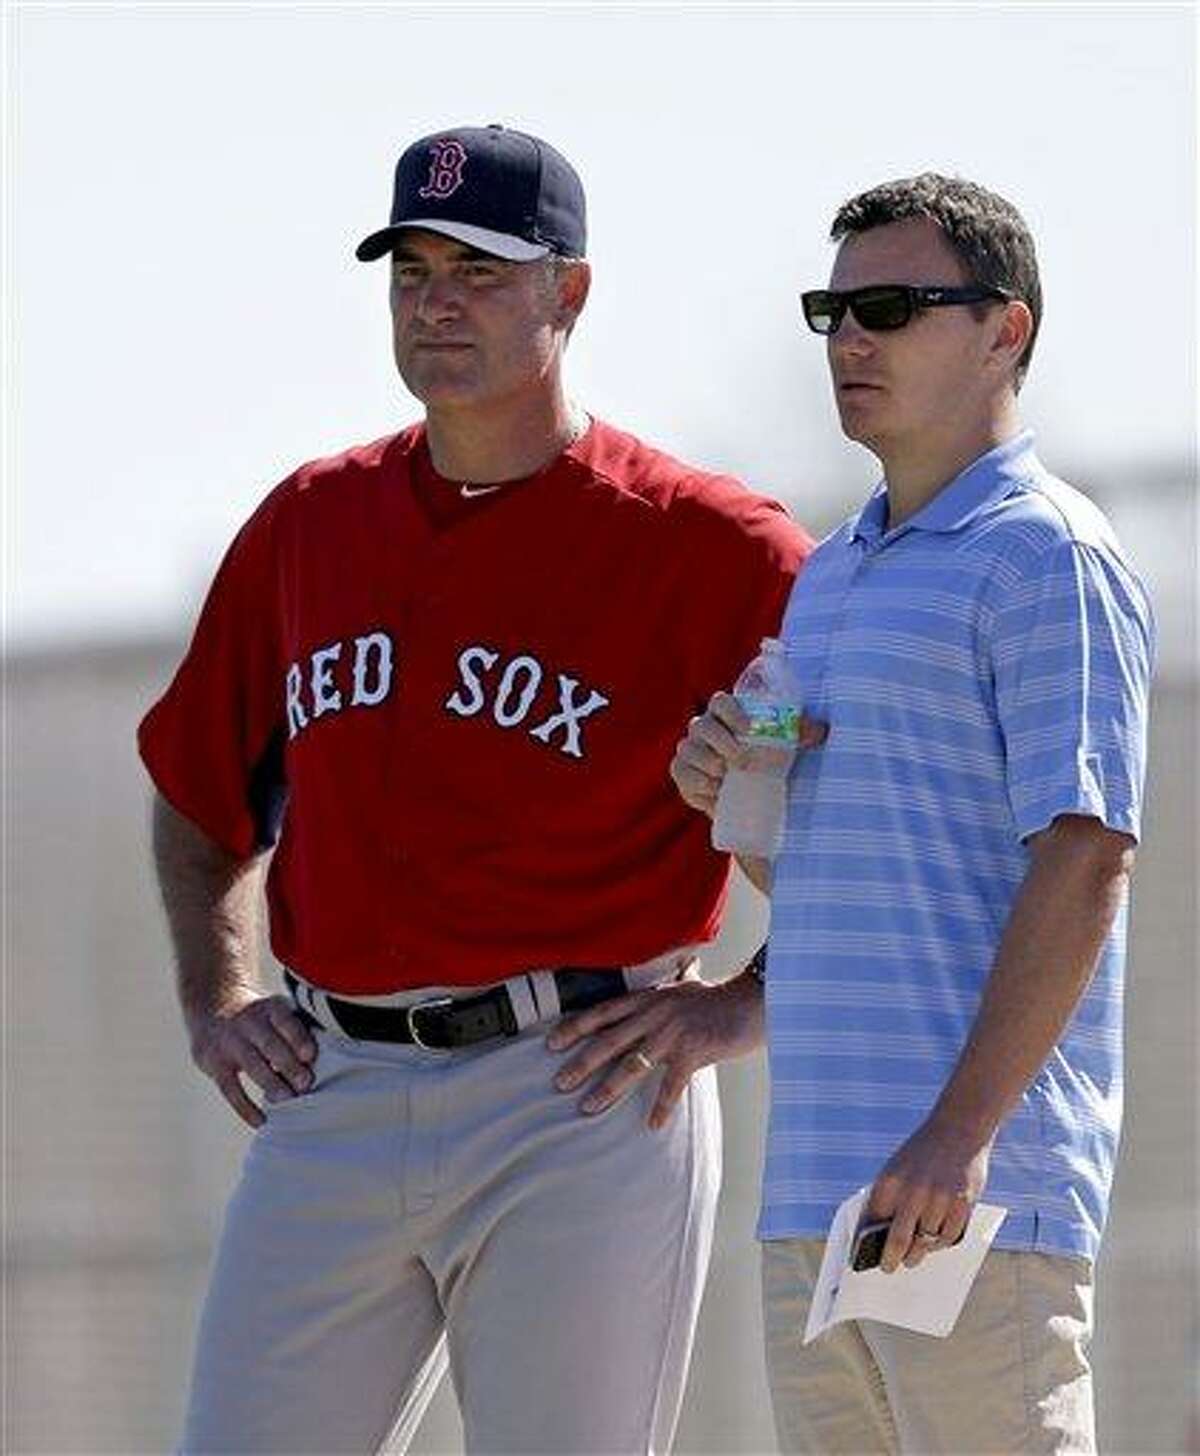 Boston Red Sox manager John Farrell, left, and general manager Ben Cherington, watch as Alfredo Aceves pitches batting practice during a spring training baseball workout, Wednesday, Feb. 20, 2013, in Fort Myers, Fla. (AP Photo/David Goldman)